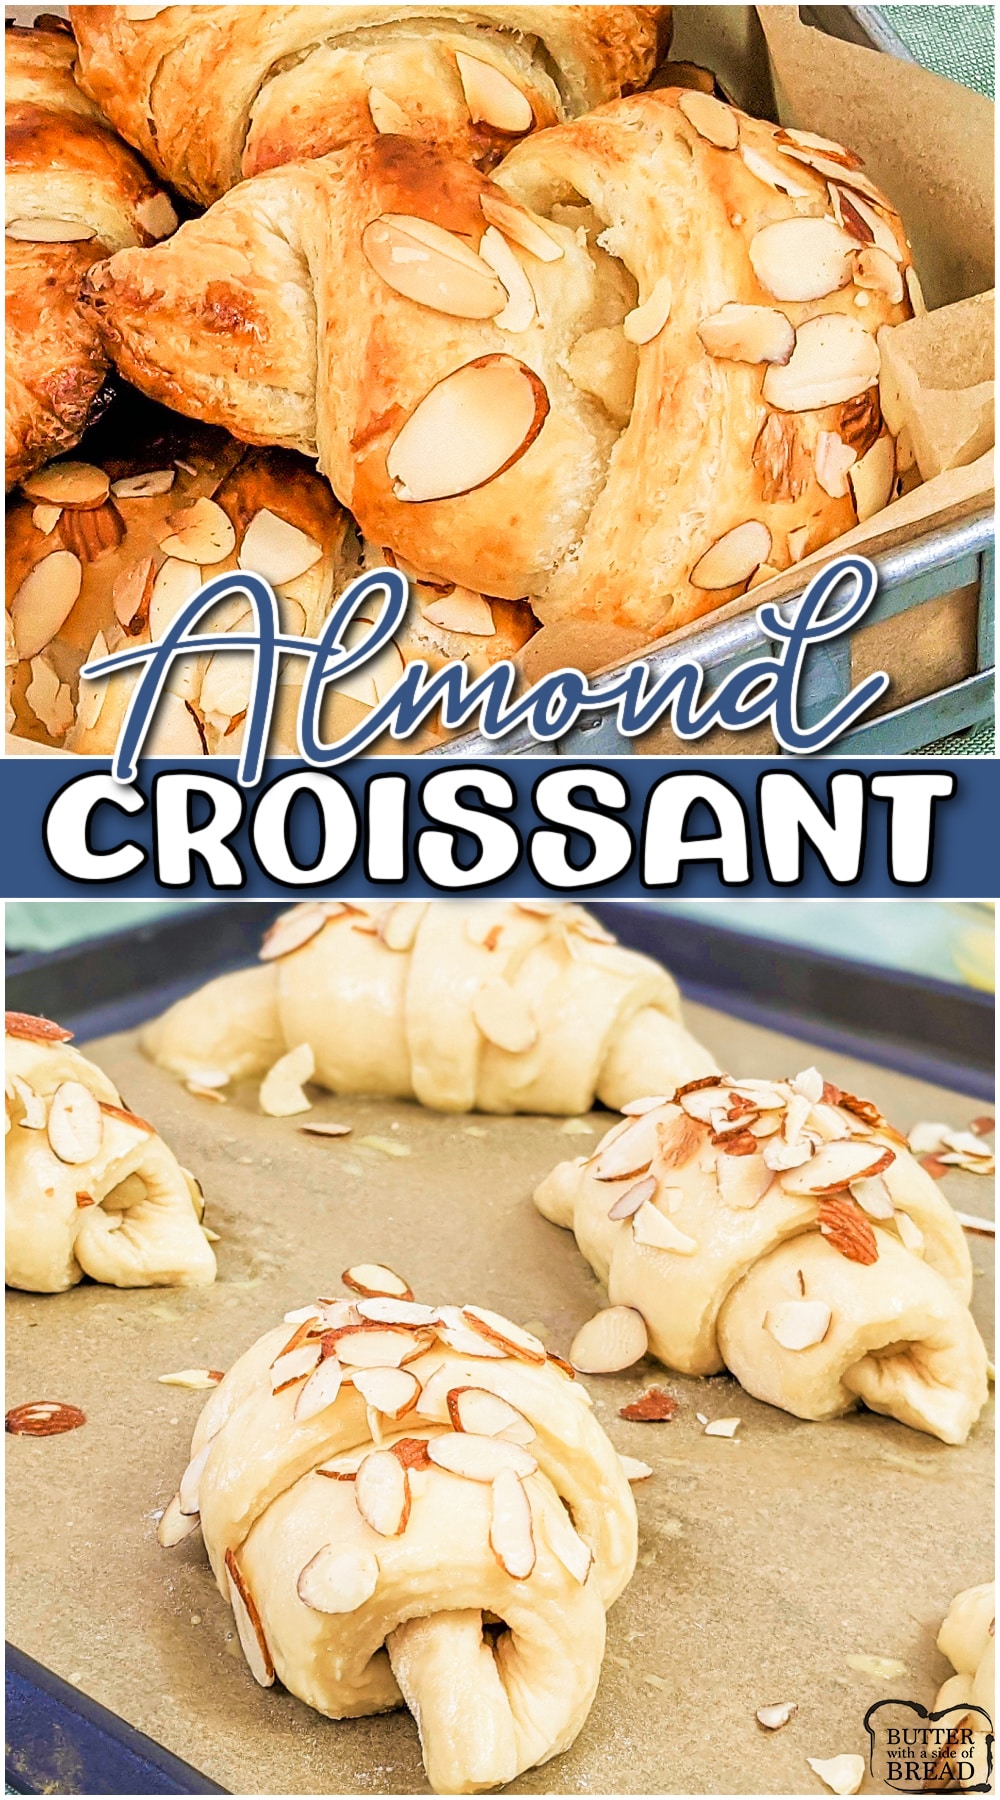 Almond Croissants a delicious, flaky, homemade treat that brings the bakery to you! Give this recipe for almond croissants a try, every buttery batch is well worth it! 